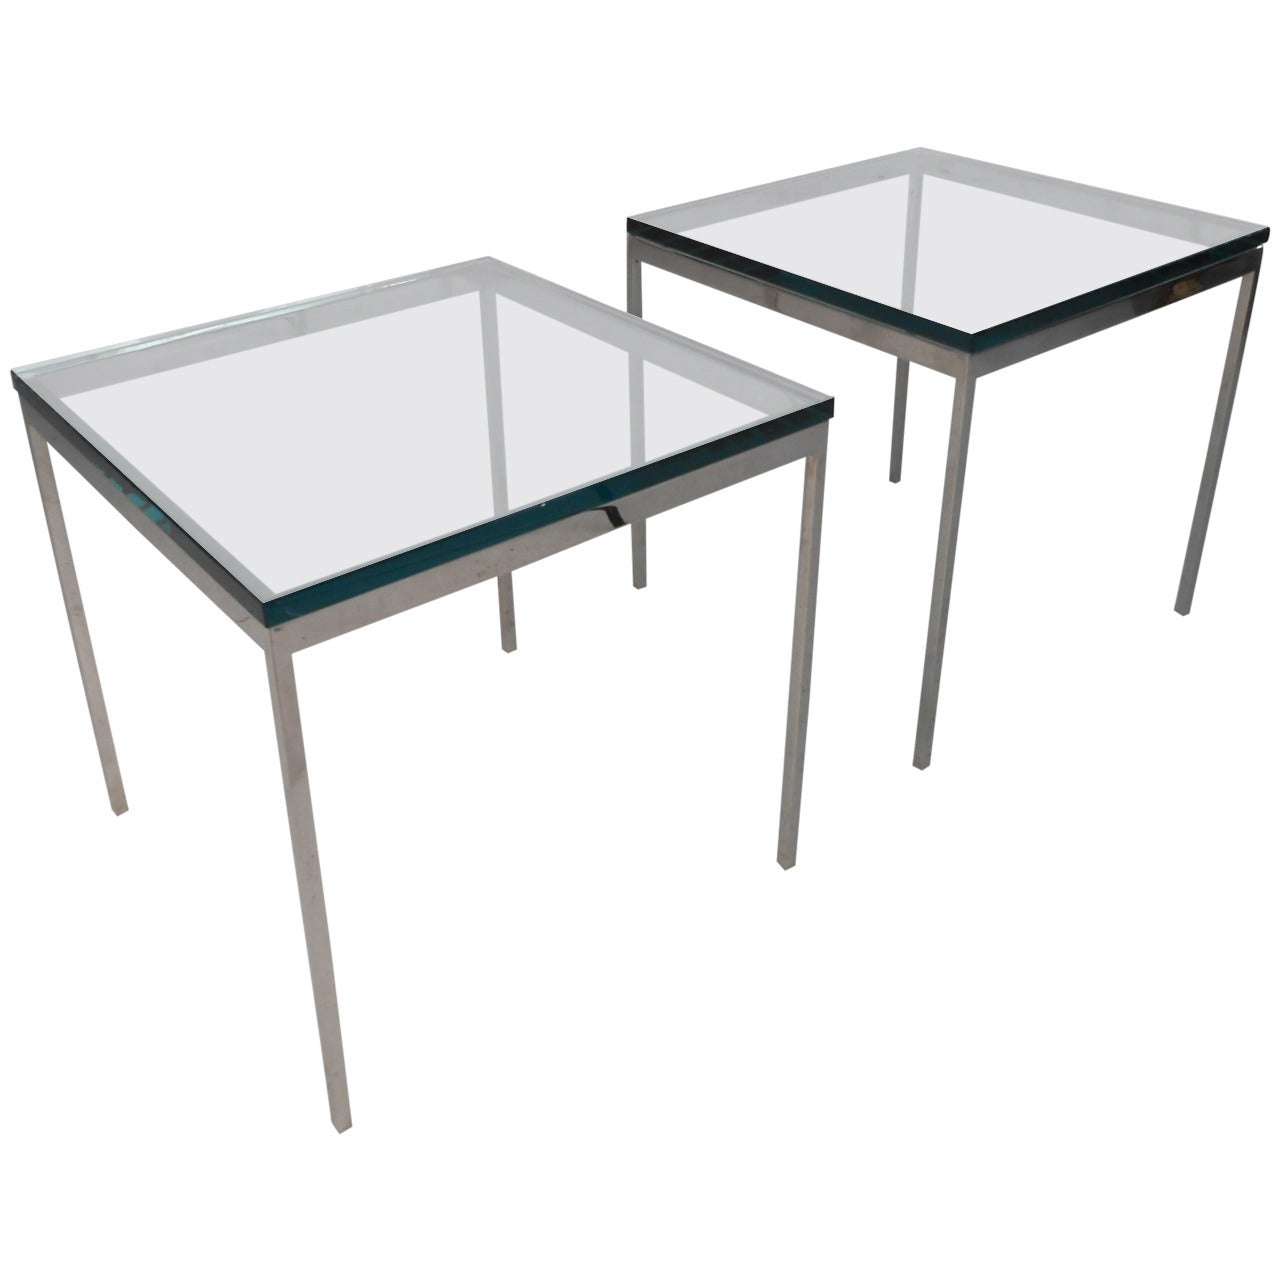 Pair Mid-Century Modern Chrome And Glass Gerald McCabe End Tables